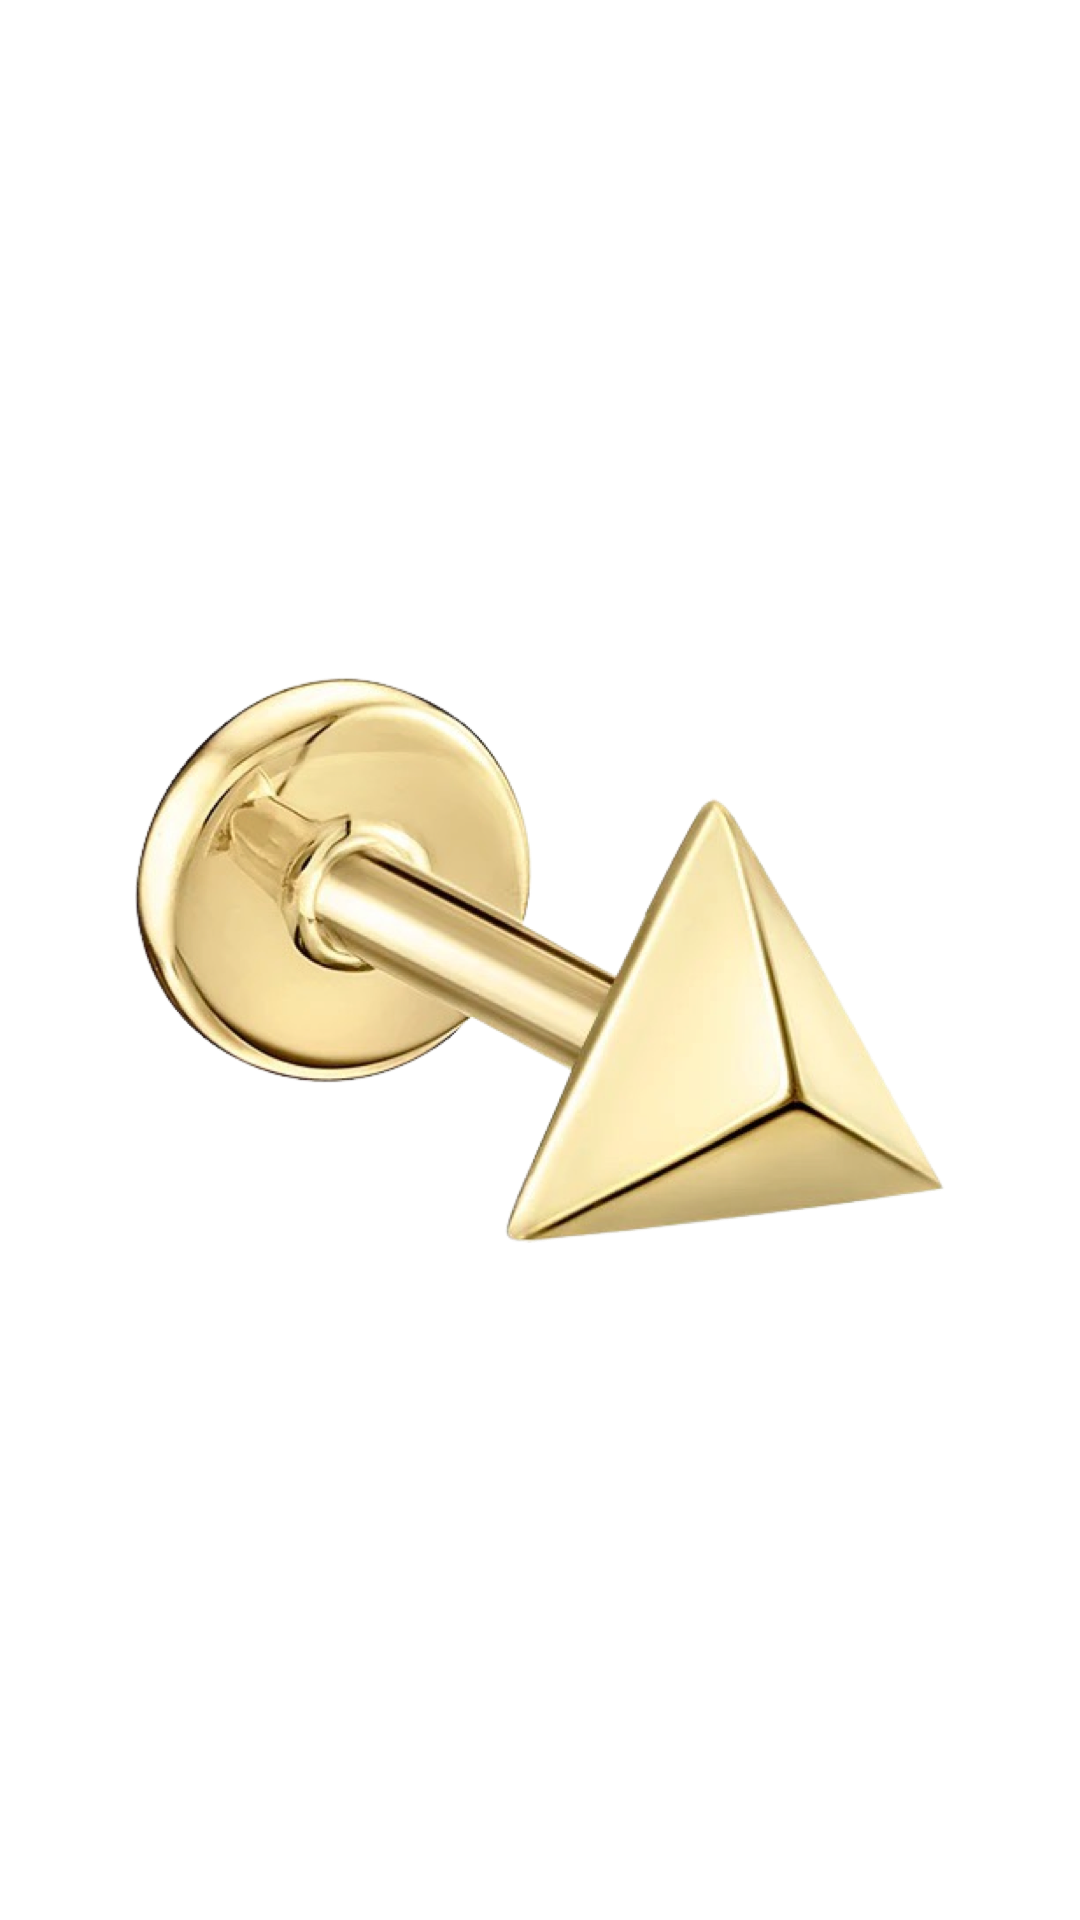 Faceted Triangle Threaded Stud Earring